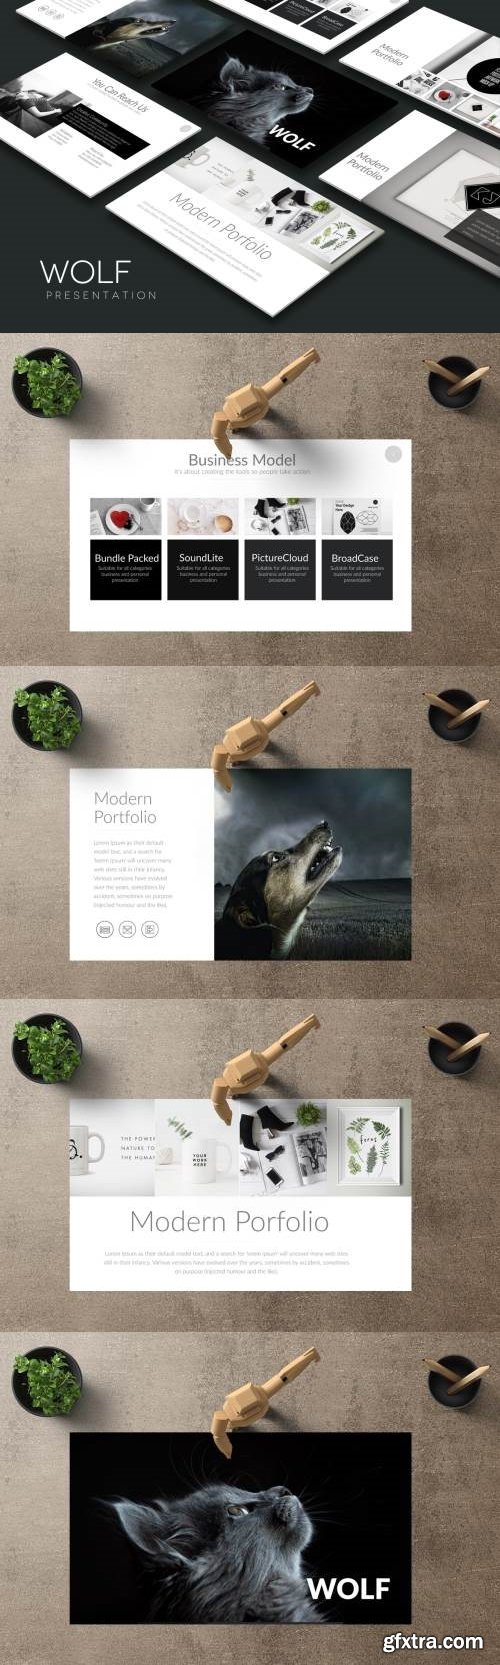 WOLF Powerpoint Template